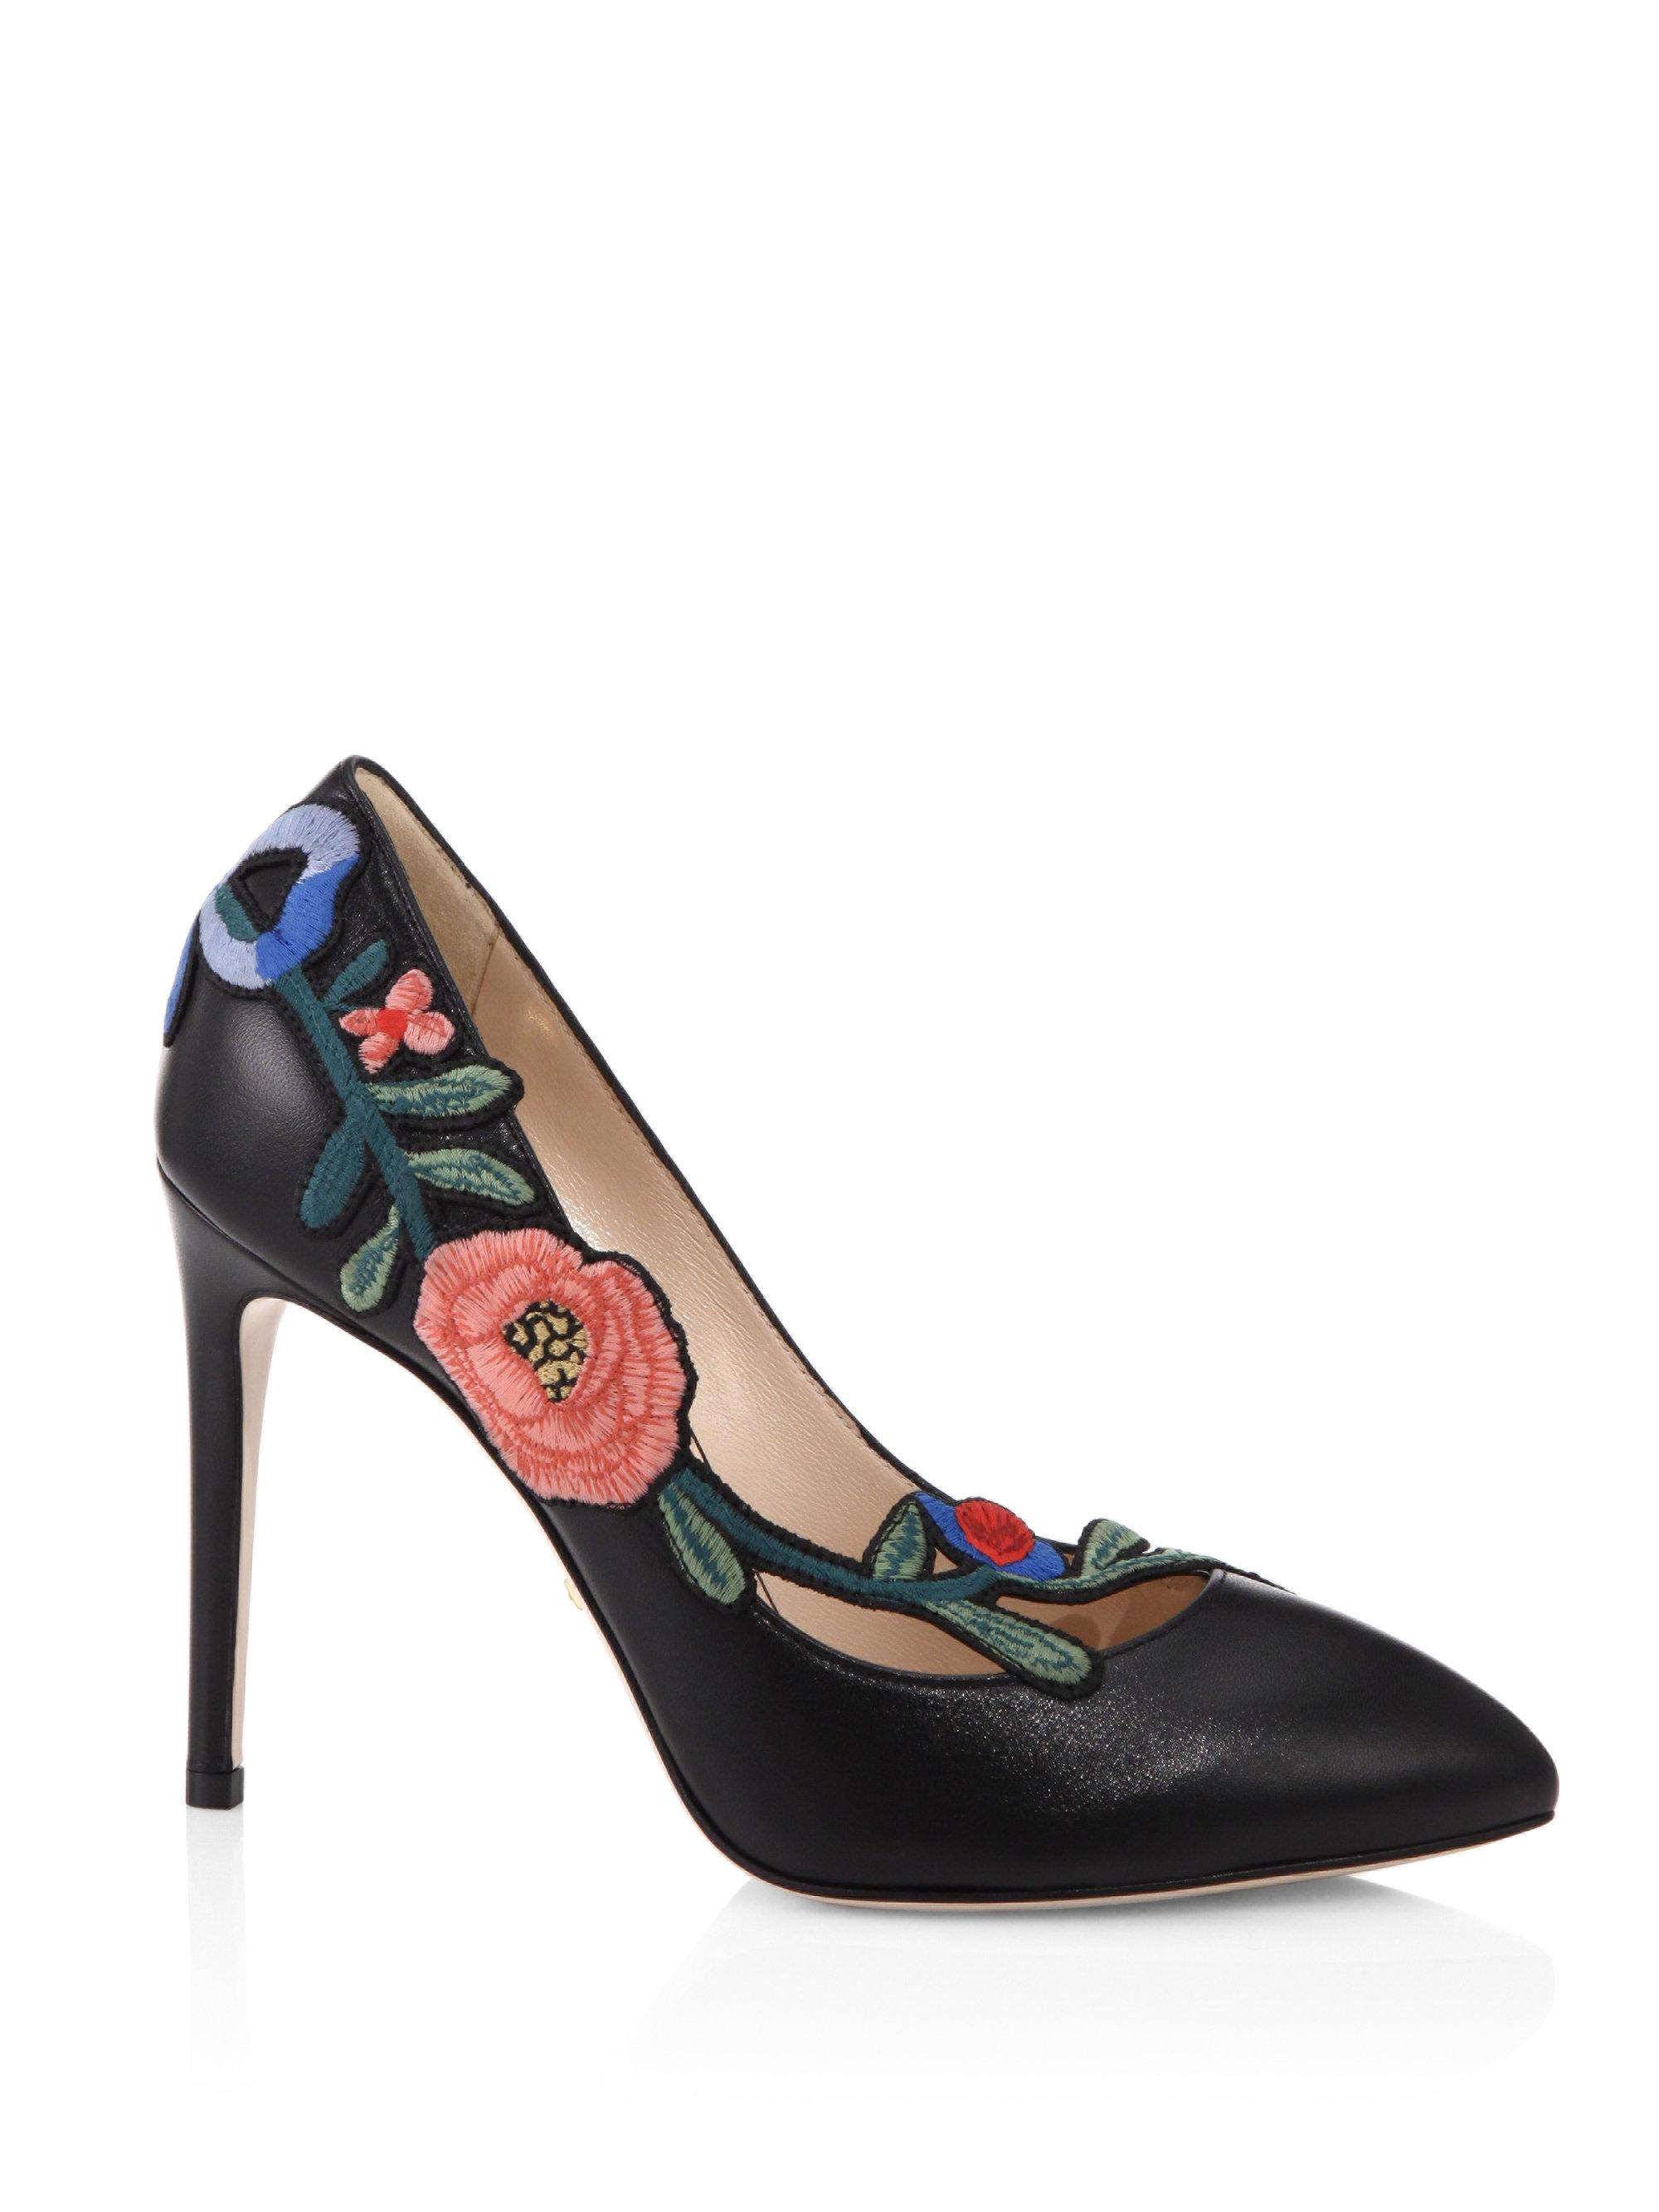 Gucci Ophelia Floral-embroidered 